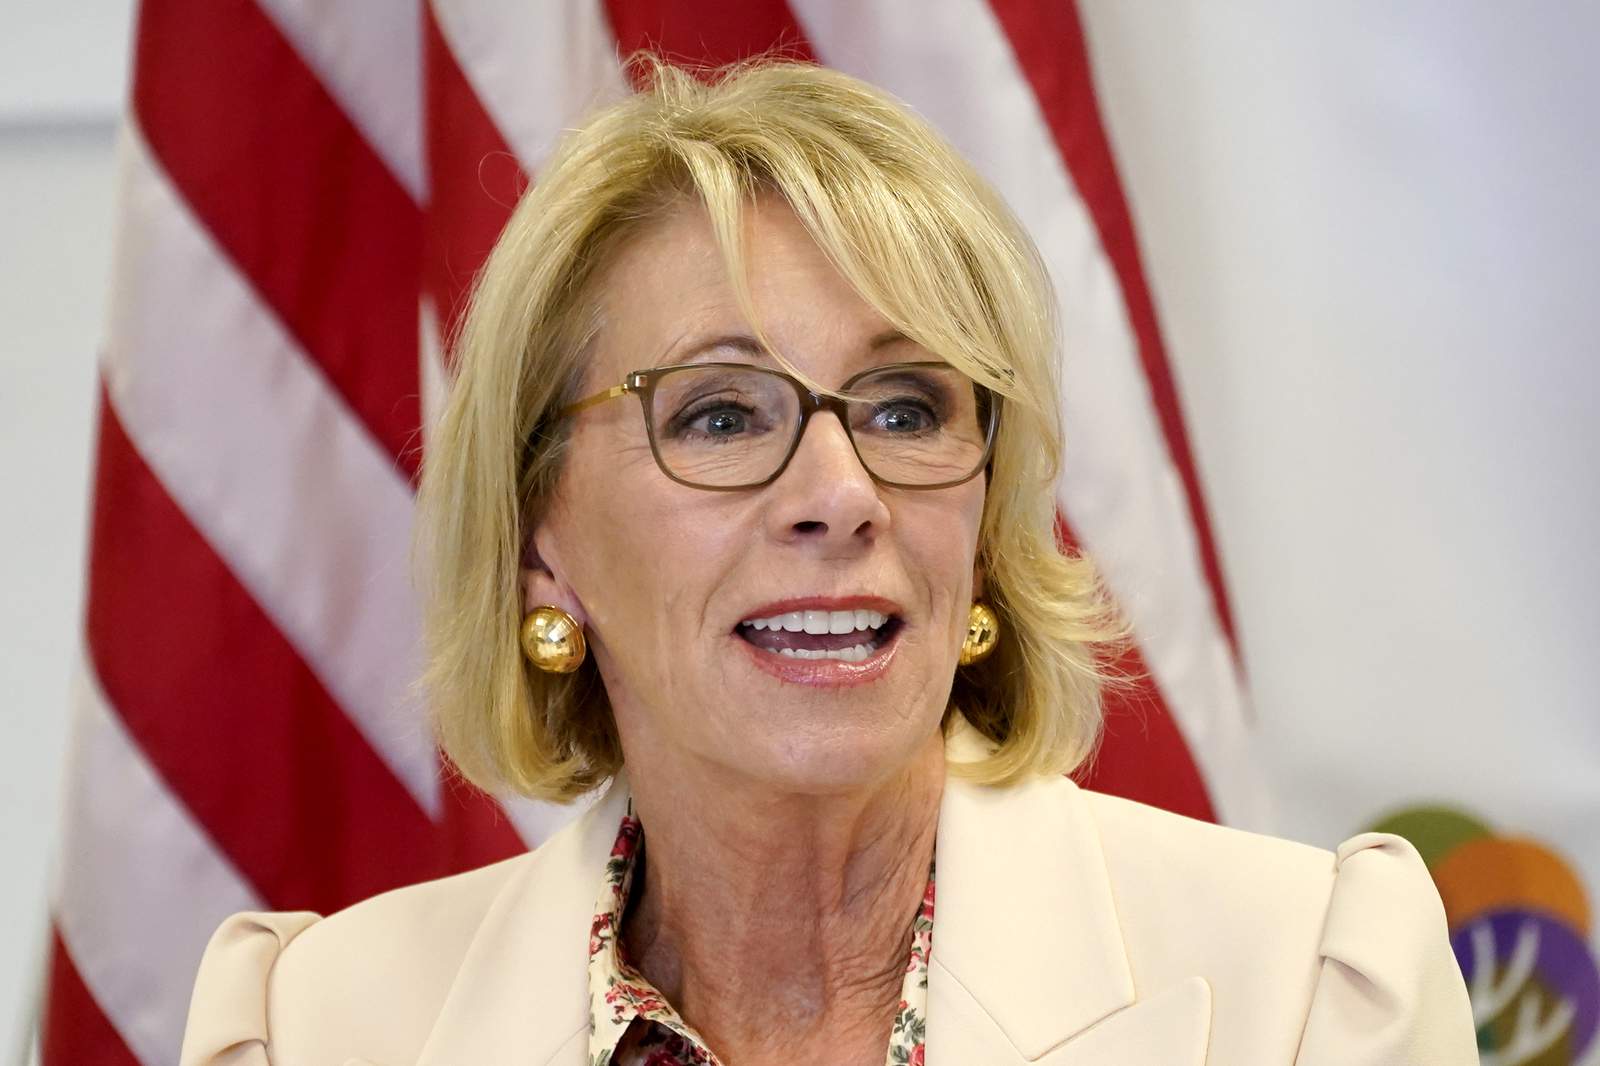 DeVos suspends federal student loan payments through January 2021